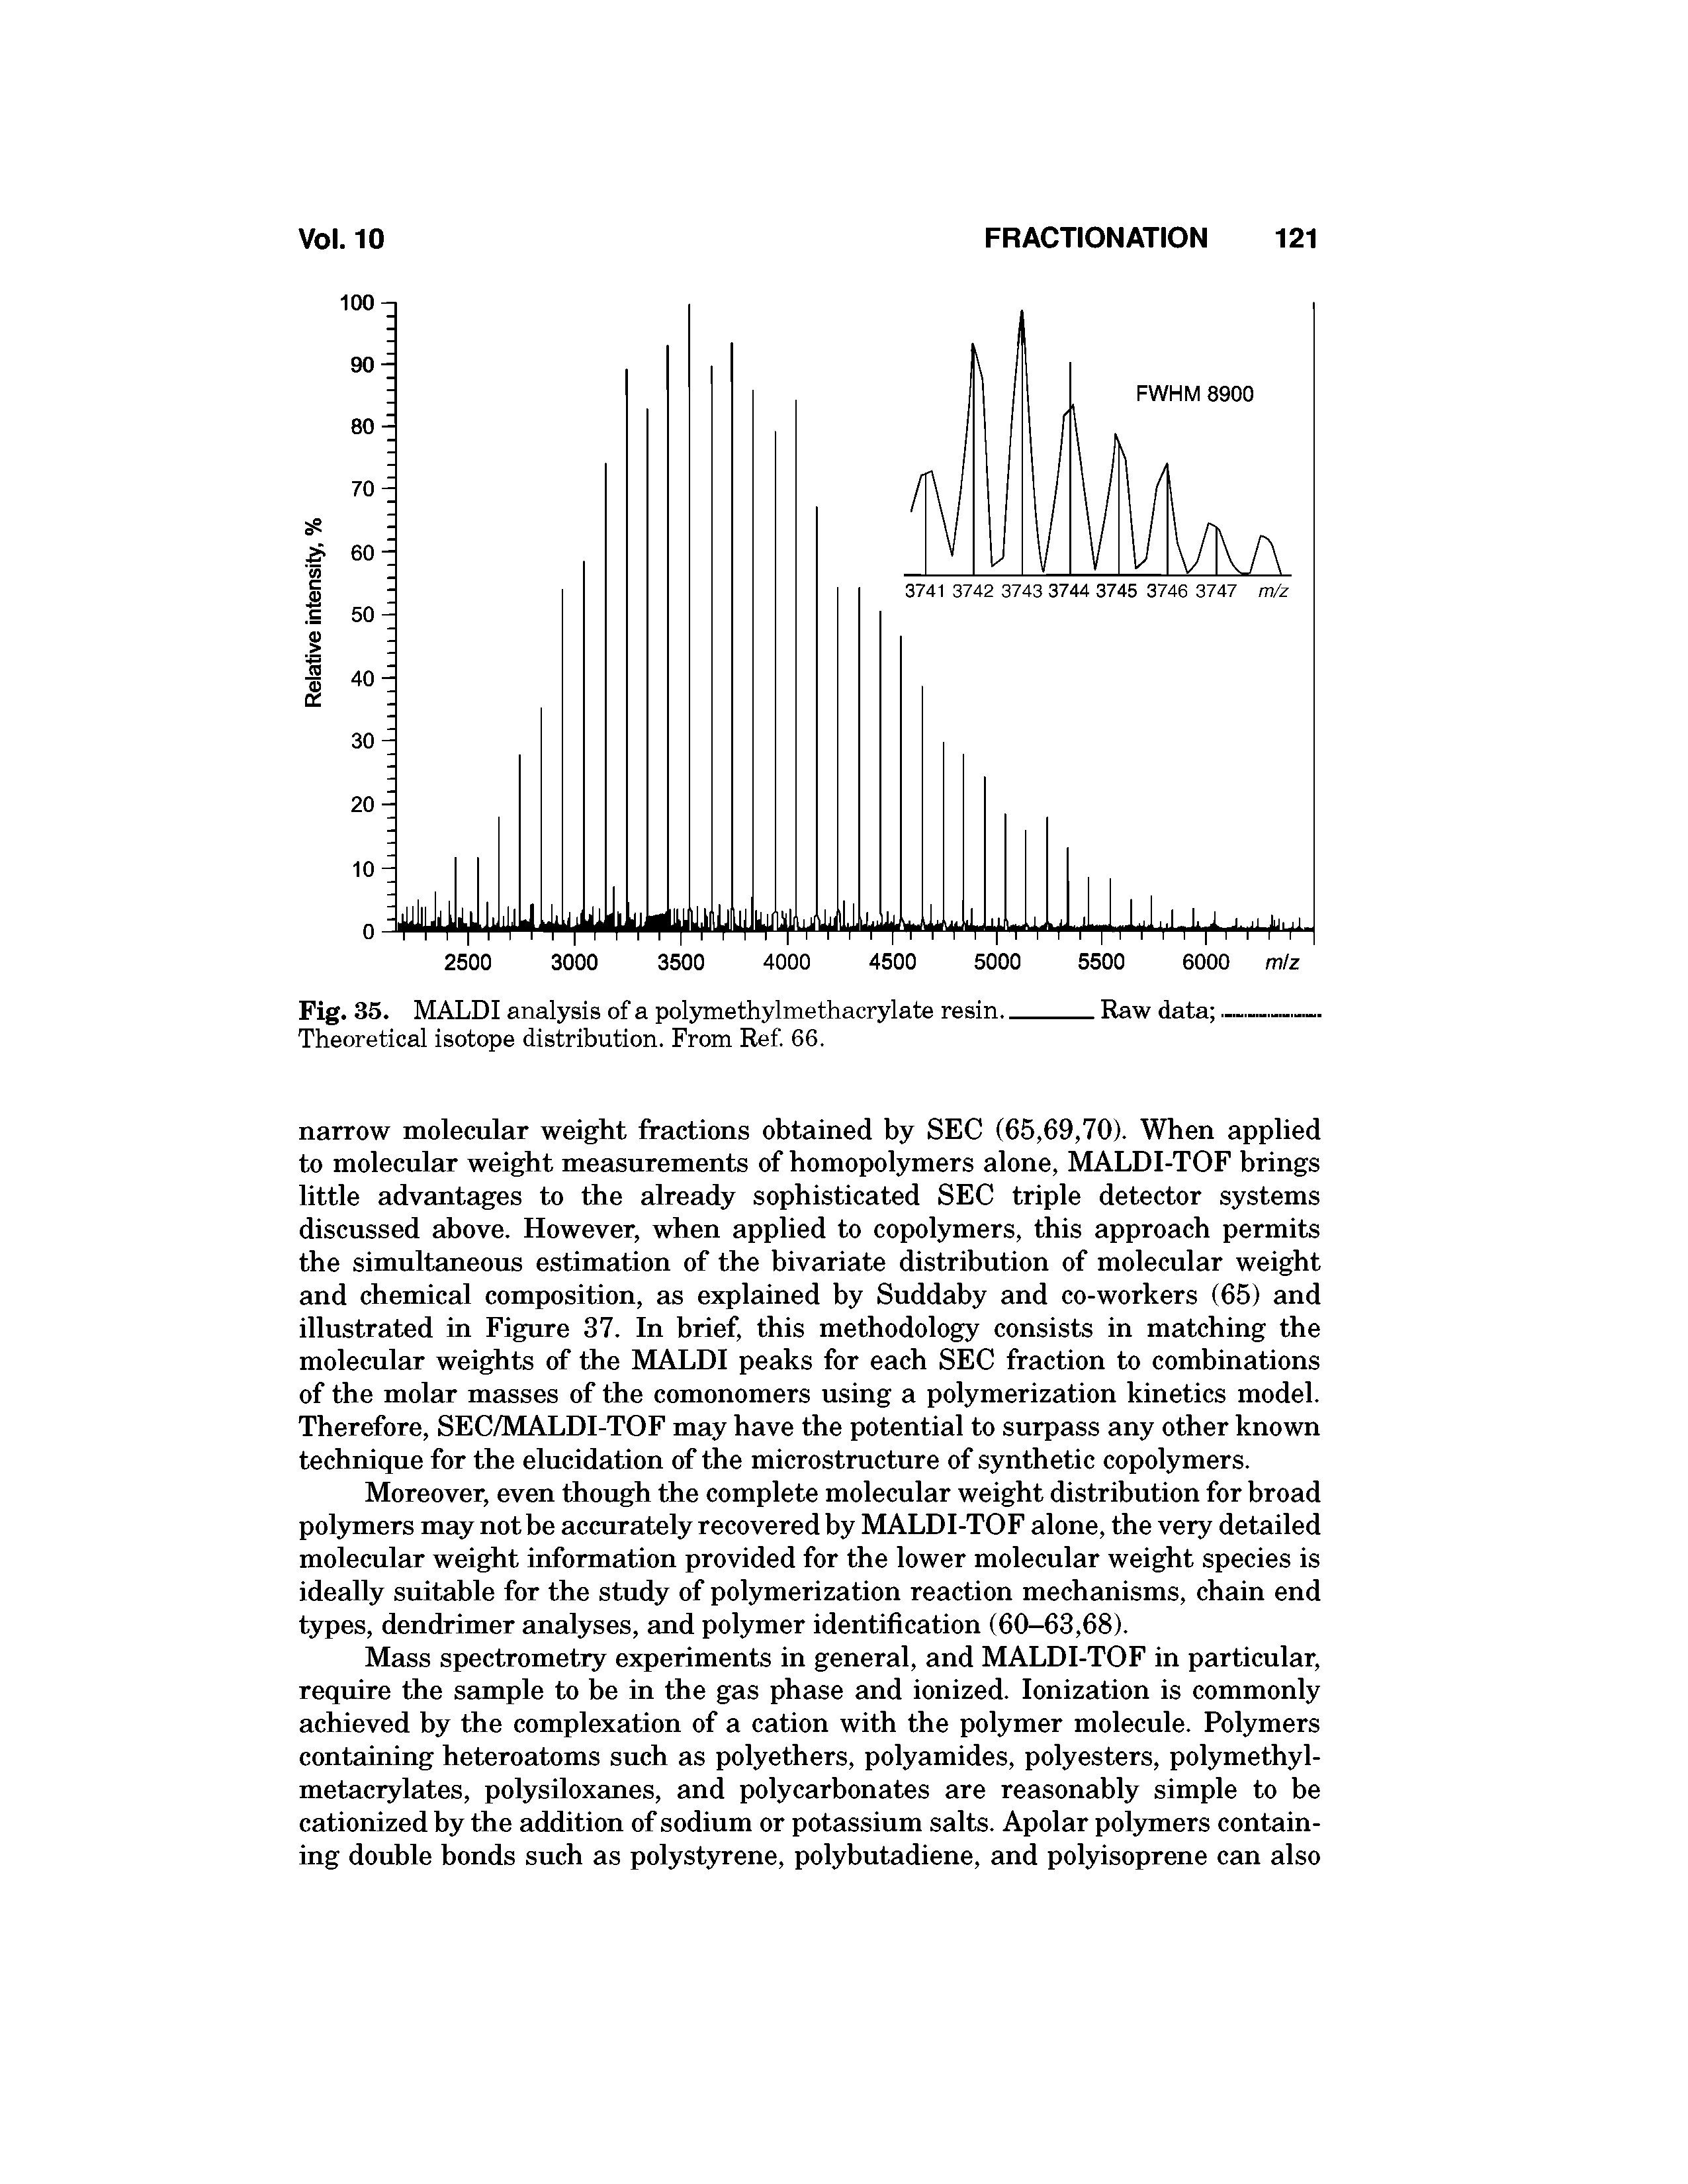 Fig. 35. MALDI analysis of a polymethylmethacrylate resin.. Theoretical isotope distribution. From Ref. 66.